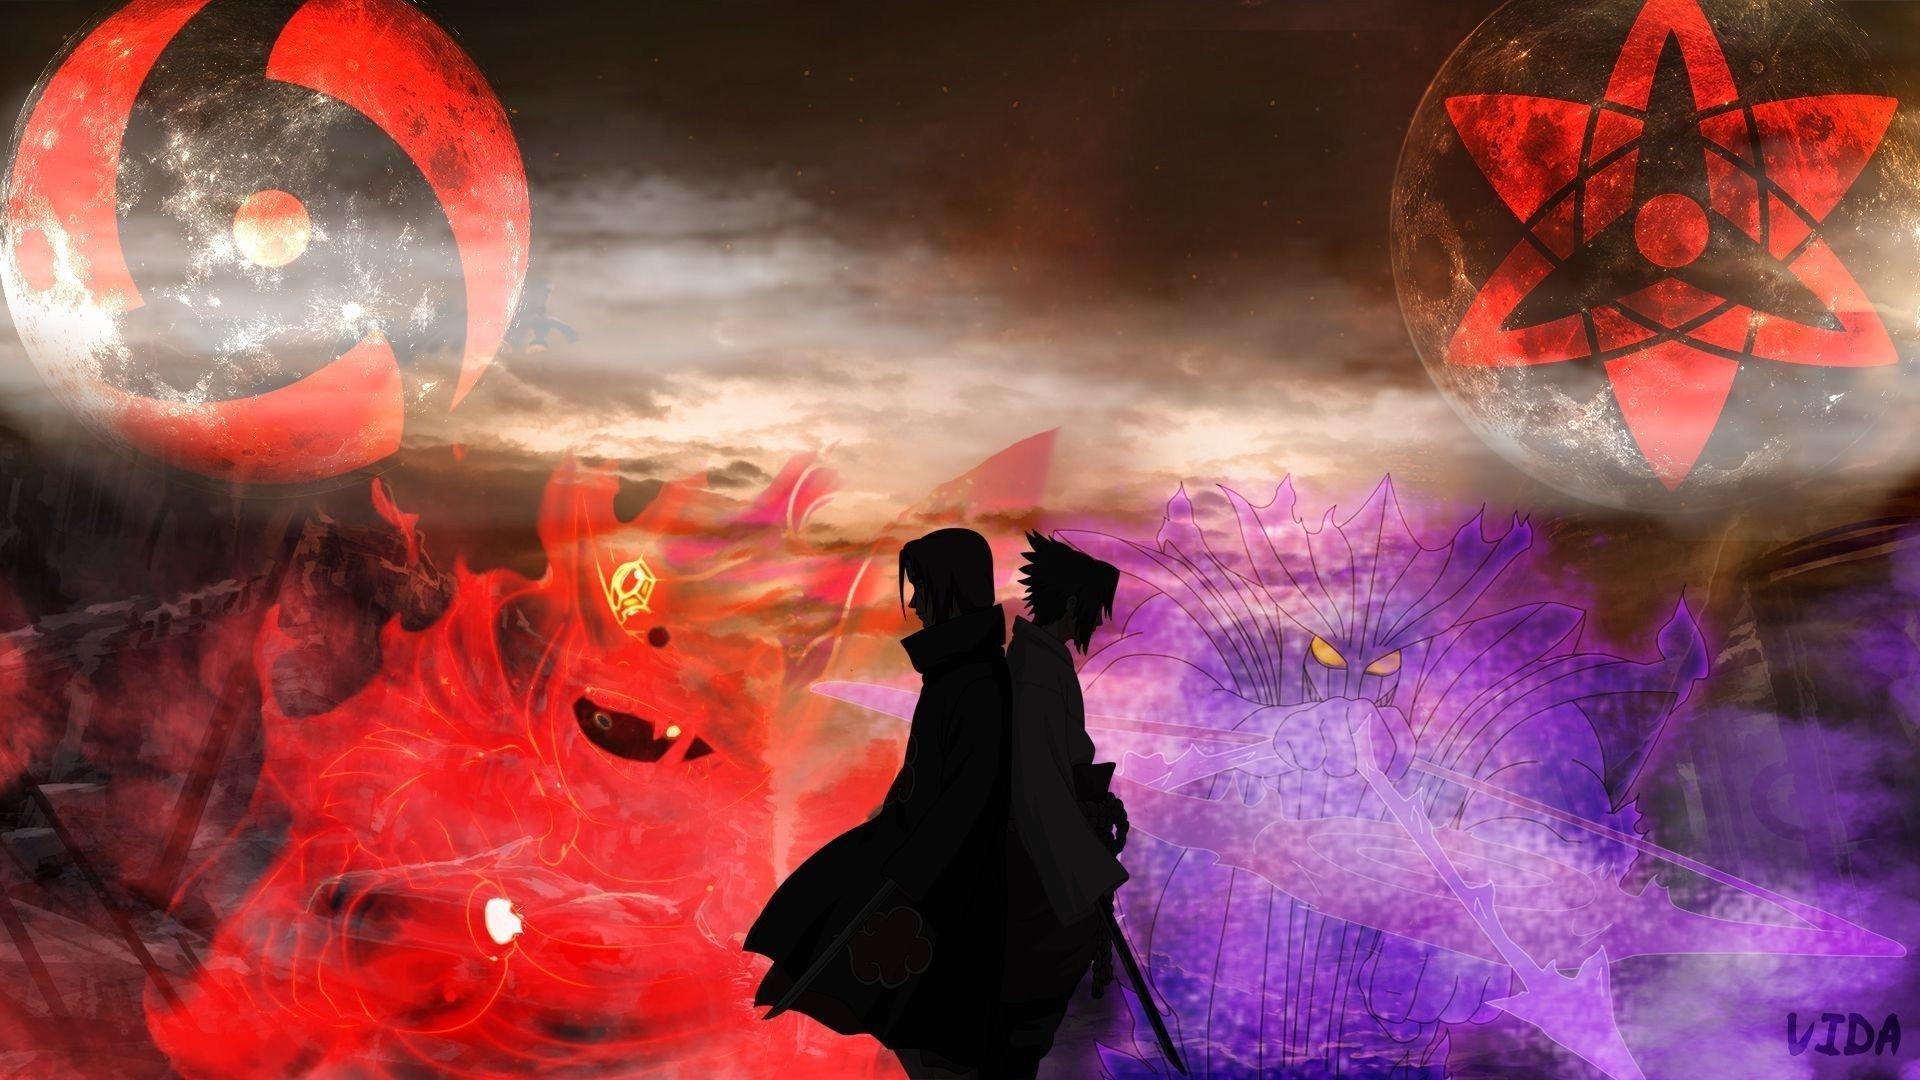 Itachi Susanoo wallpaper by ManeyHB  Download on ZEDGE  2e6a